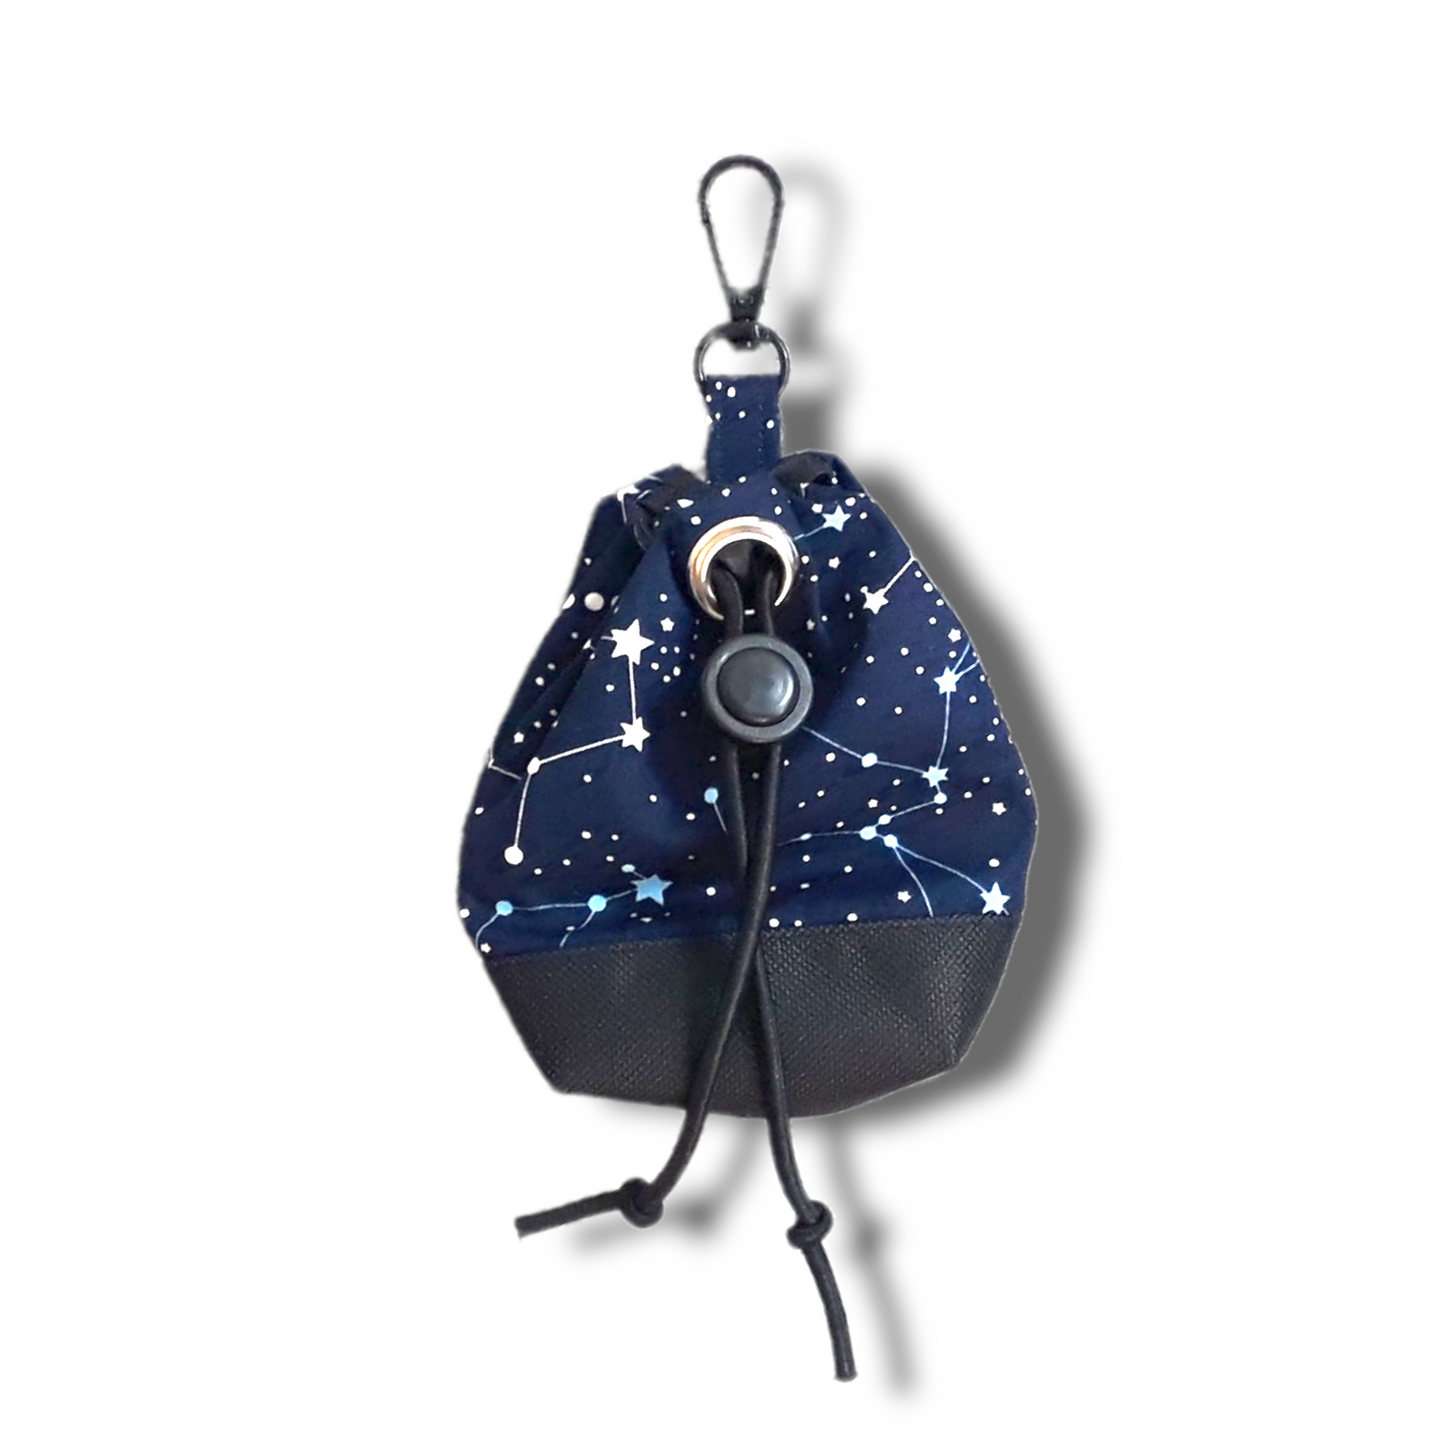 Celestial and constellations night sky print dog treat bag with poo bag holder compartment and drawstring opening/closing